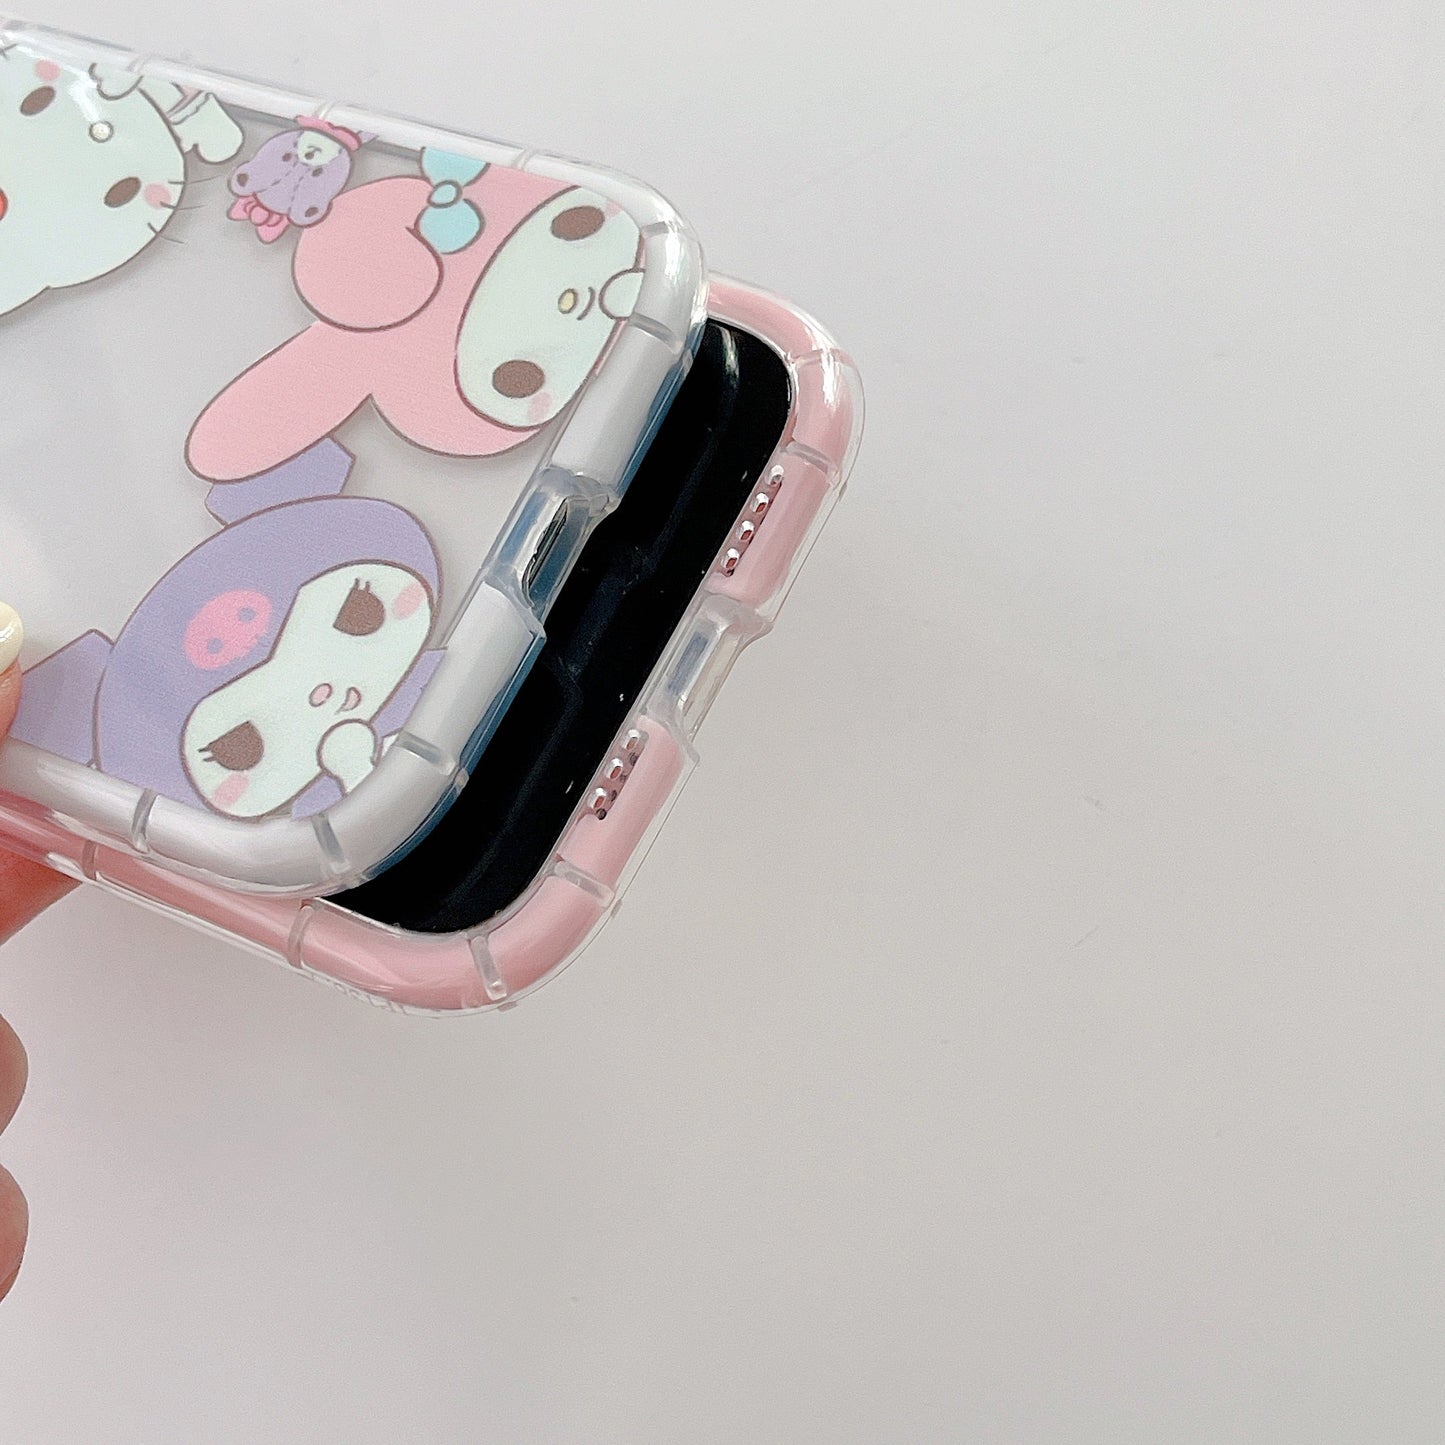 Sanrio Cinnamonroll Hello Kitty Soft Phone Cases For iPhone 13 12 11 Pro Max XR XS MAX 8 X 7 SE 2020 Lady Girl Anti-drop Cover